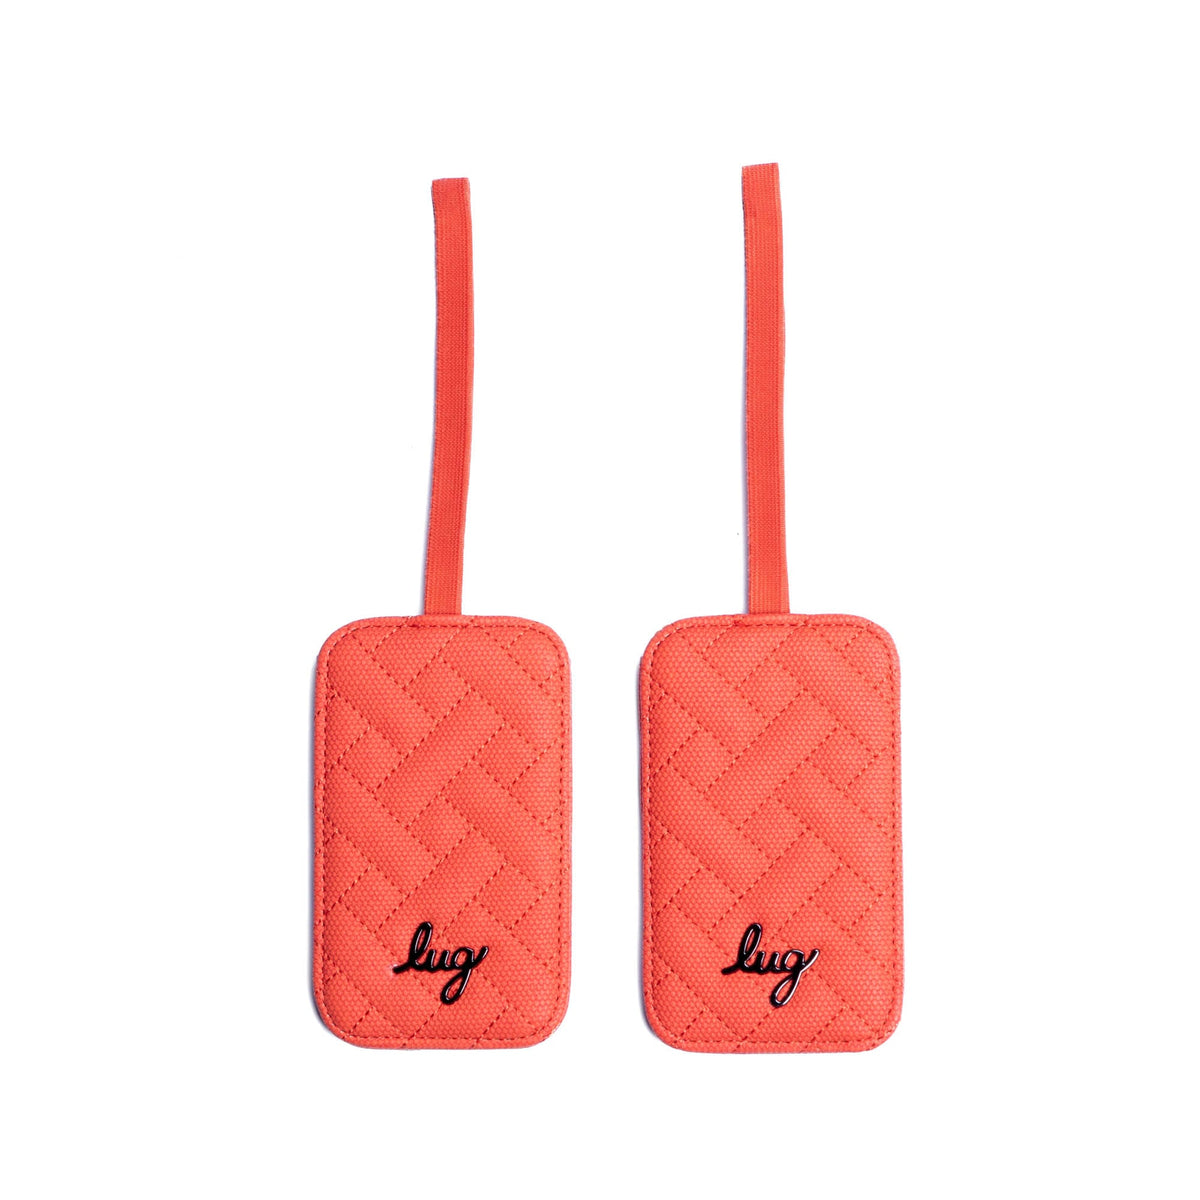 Baggage Claim Matte Luxe VL Luggage Tag 2pc Set